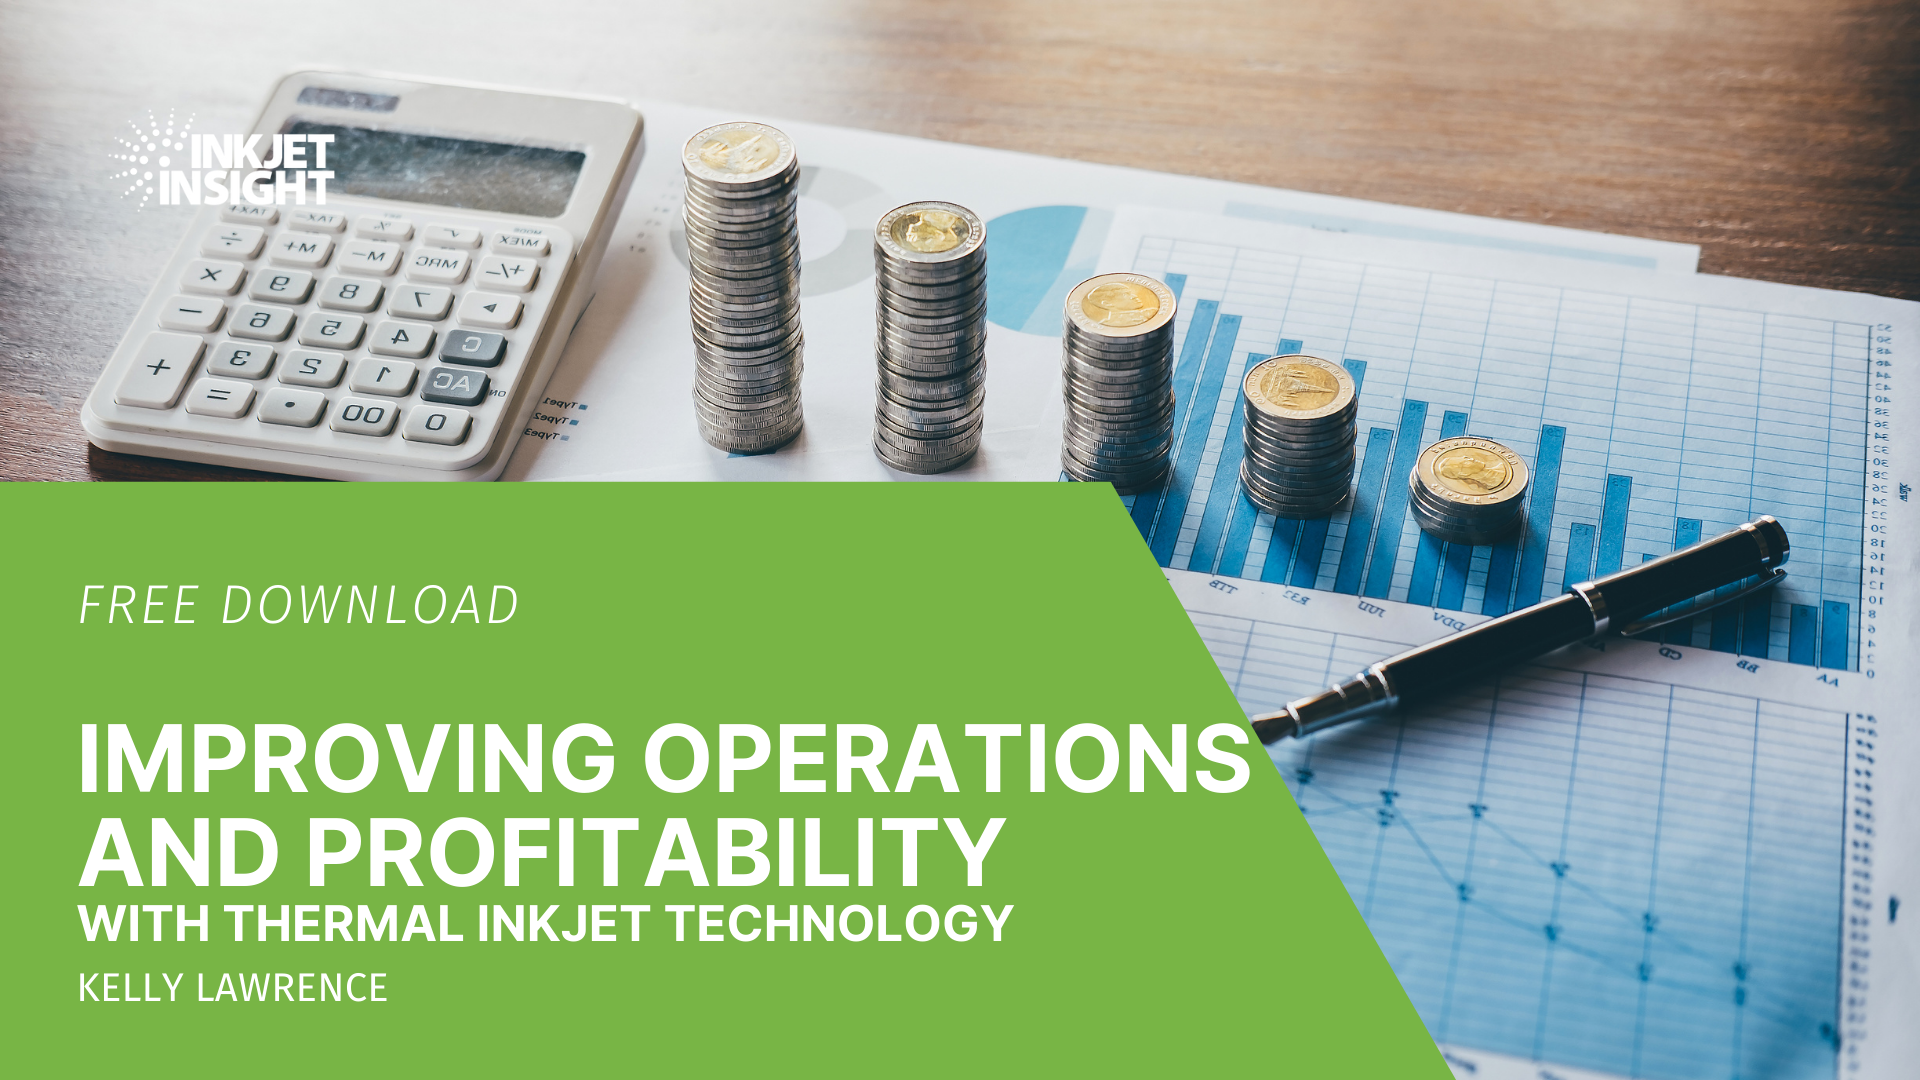 Featured image for “Download: Improving Operations and Profitability with Thermal Inkjet Technology”